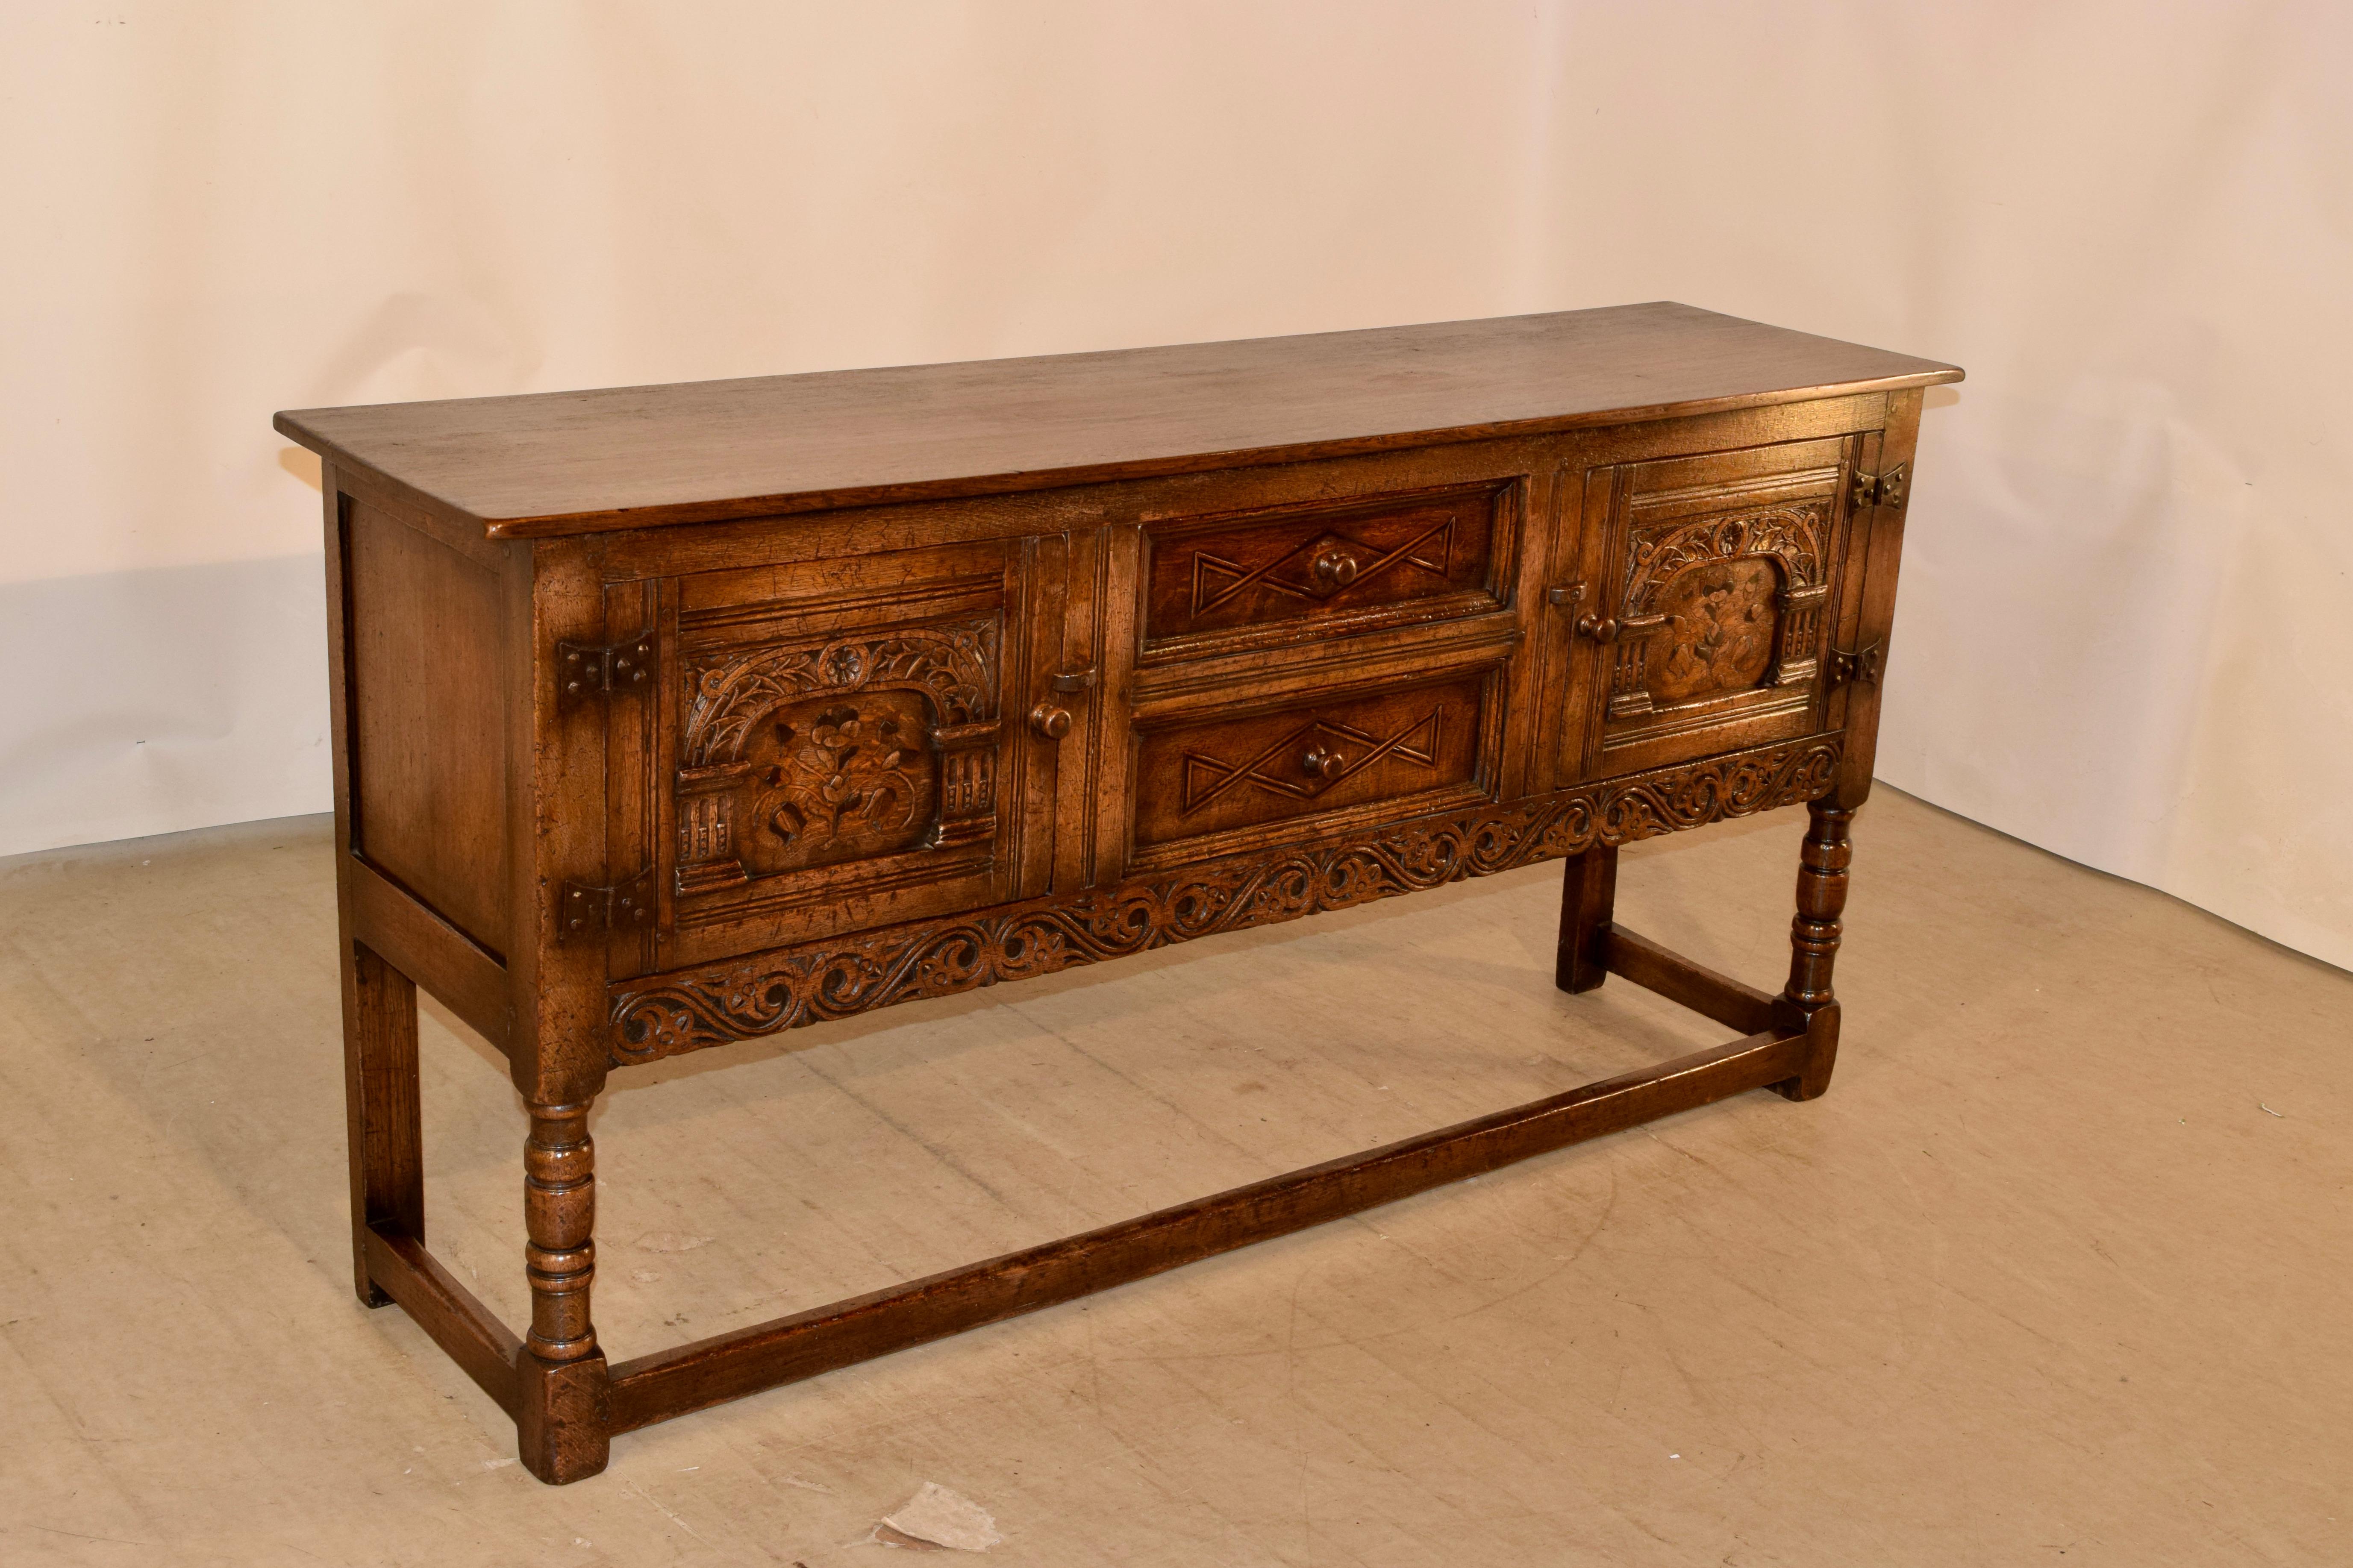 Hand-Carved Late 19th Century English Inlaid Sideboard